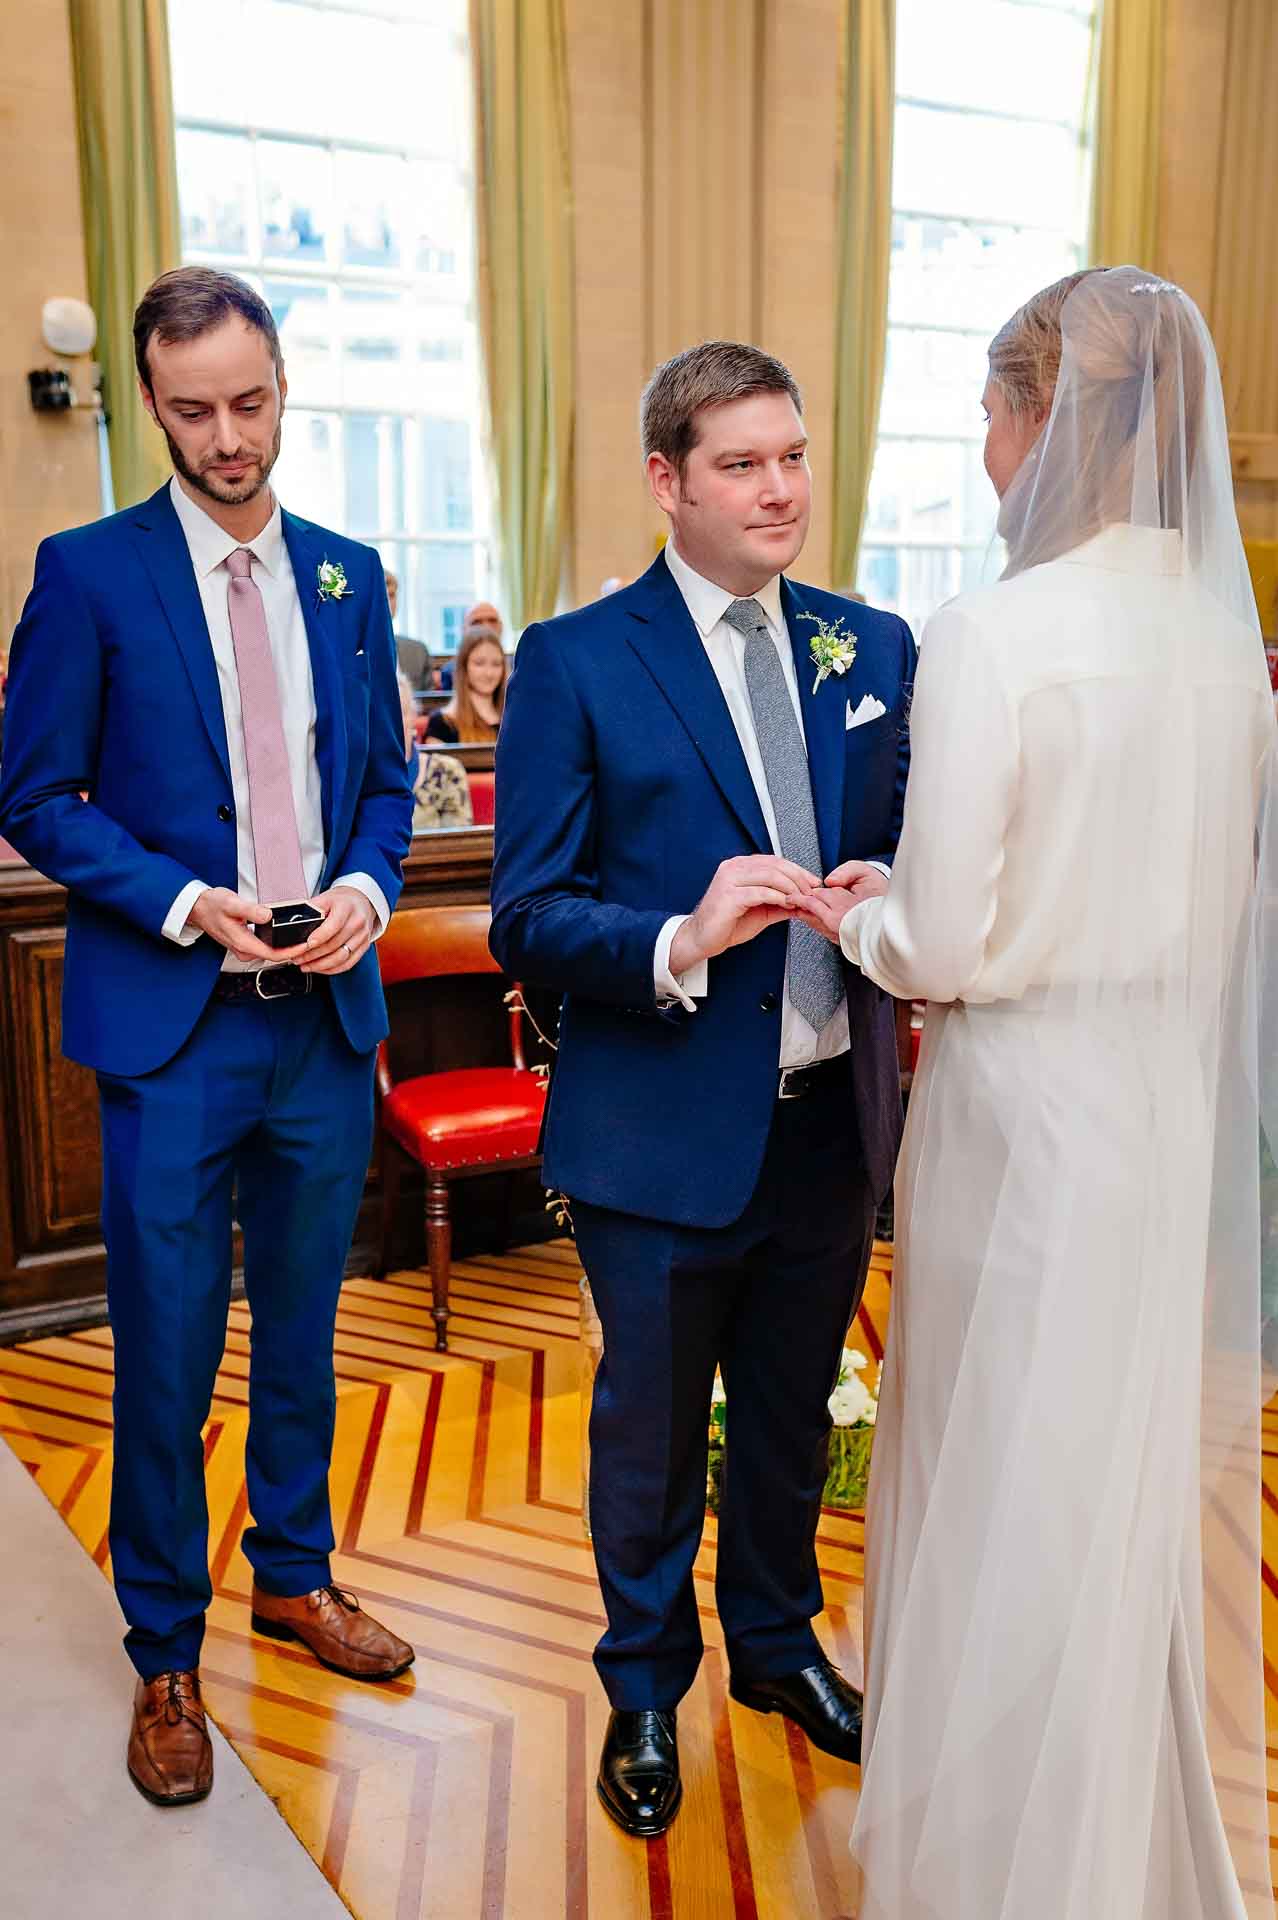 The groom places ring on finger of bride in Bristol